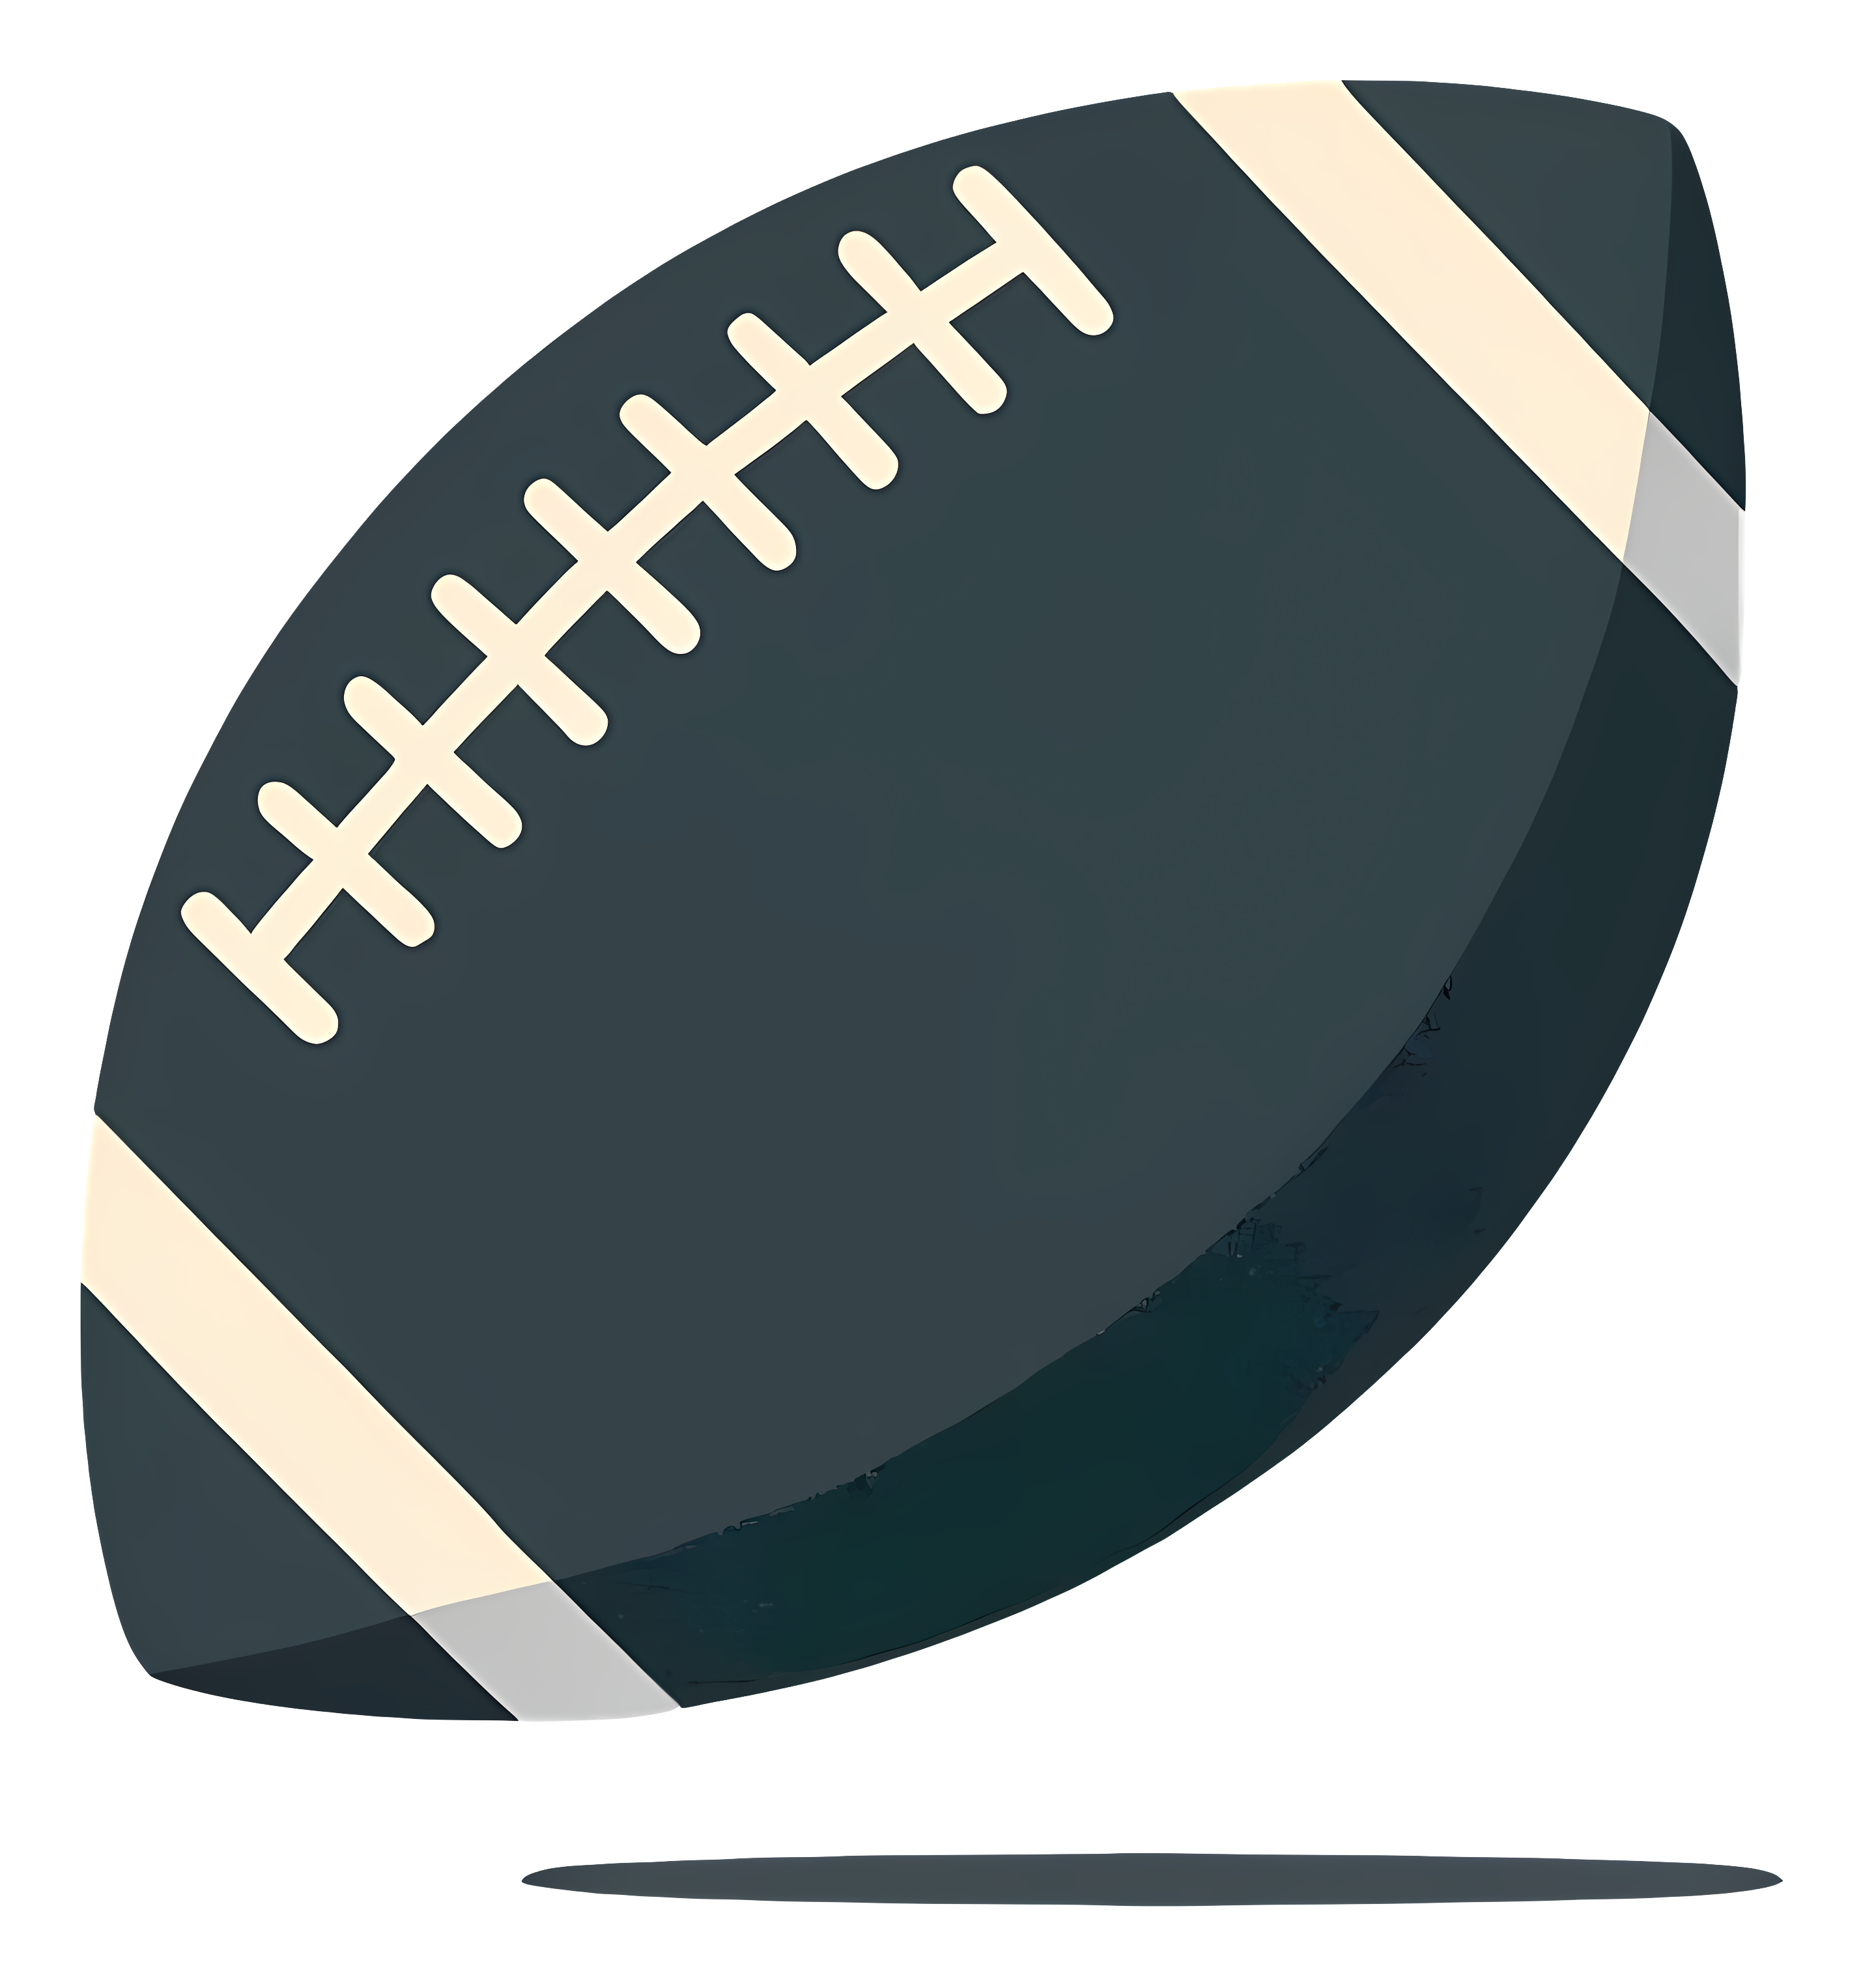 Black and white image of American football Clipart